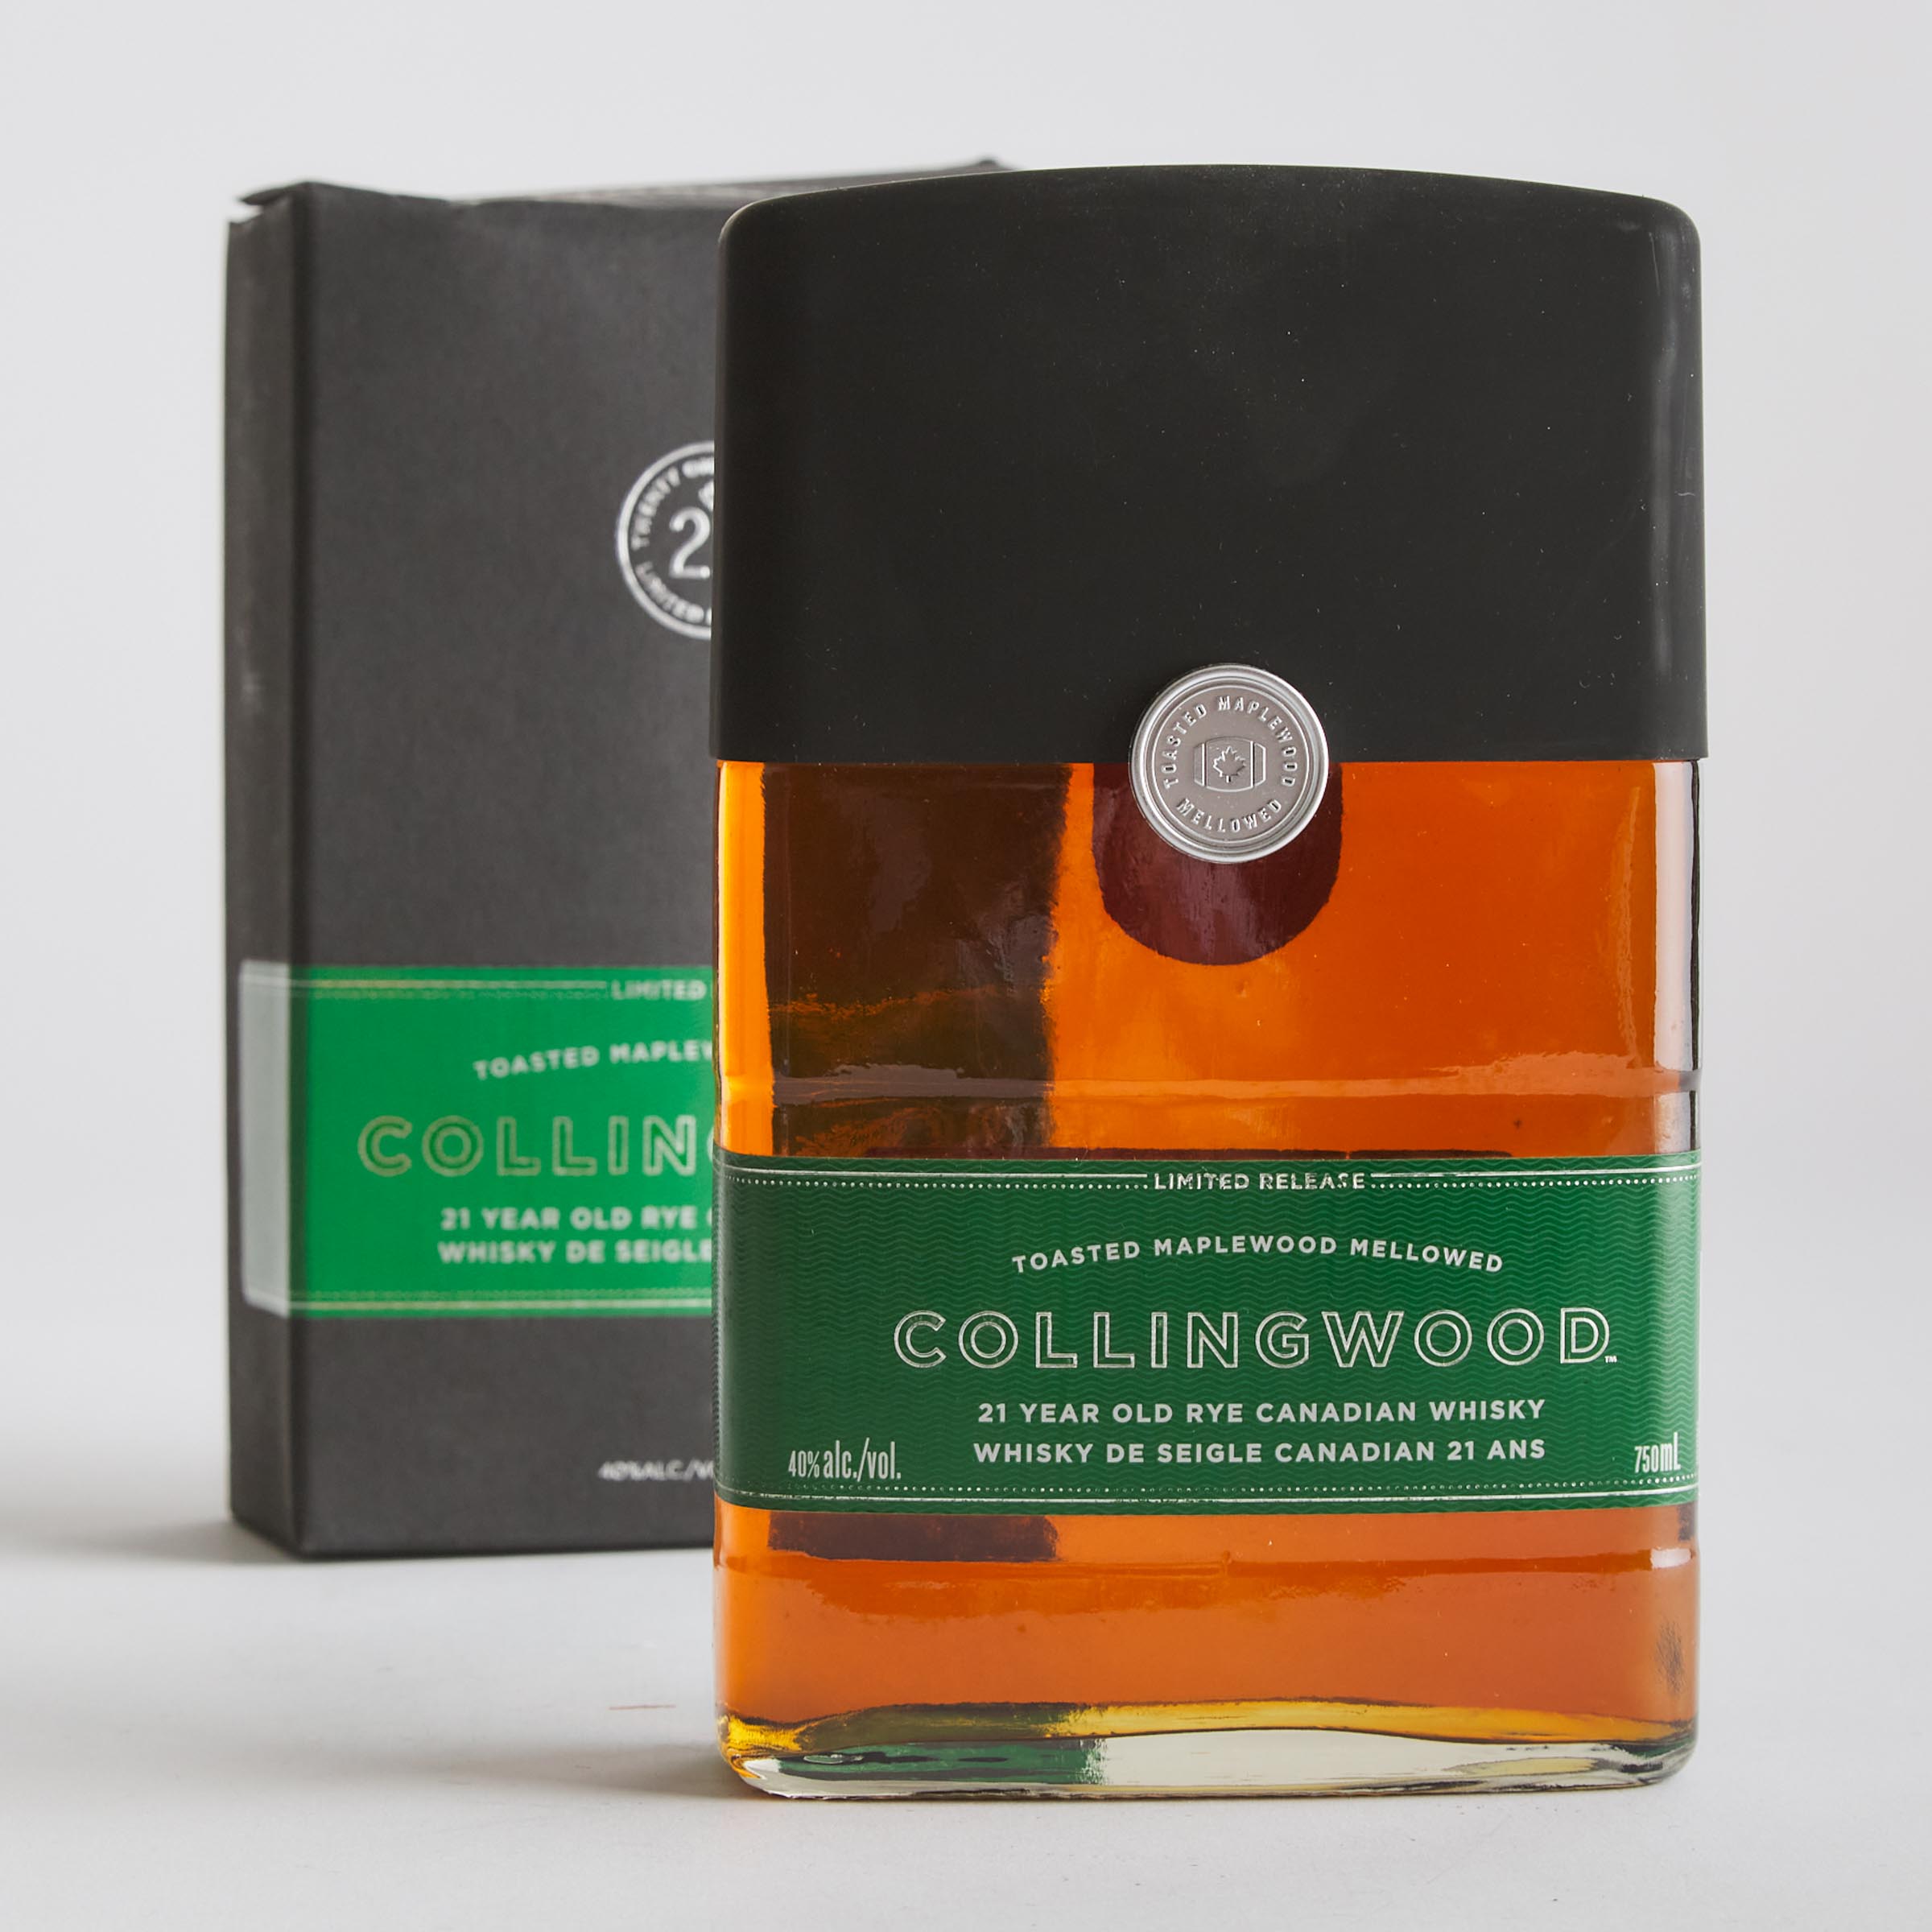 COLLINGWOOD BLENDED CANADIAN WHISKY 21 YEARS (ONE 750 ML)